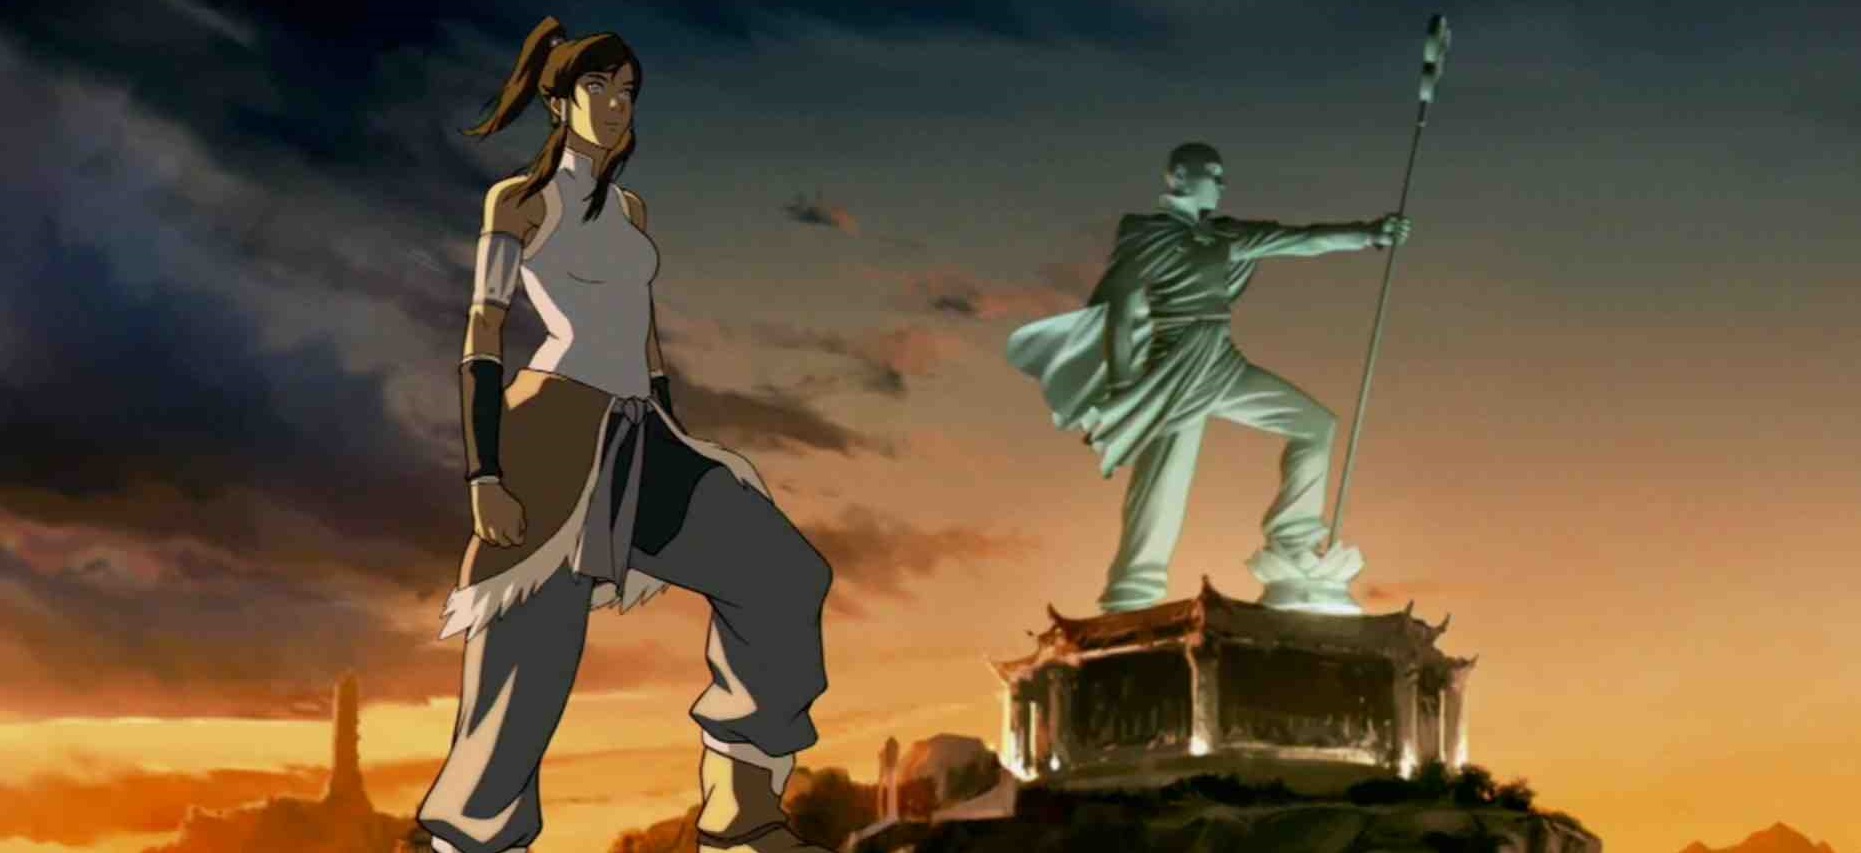 “Legend of Korra” Game Release Date Announced As “Book 3” of the Show Concludes